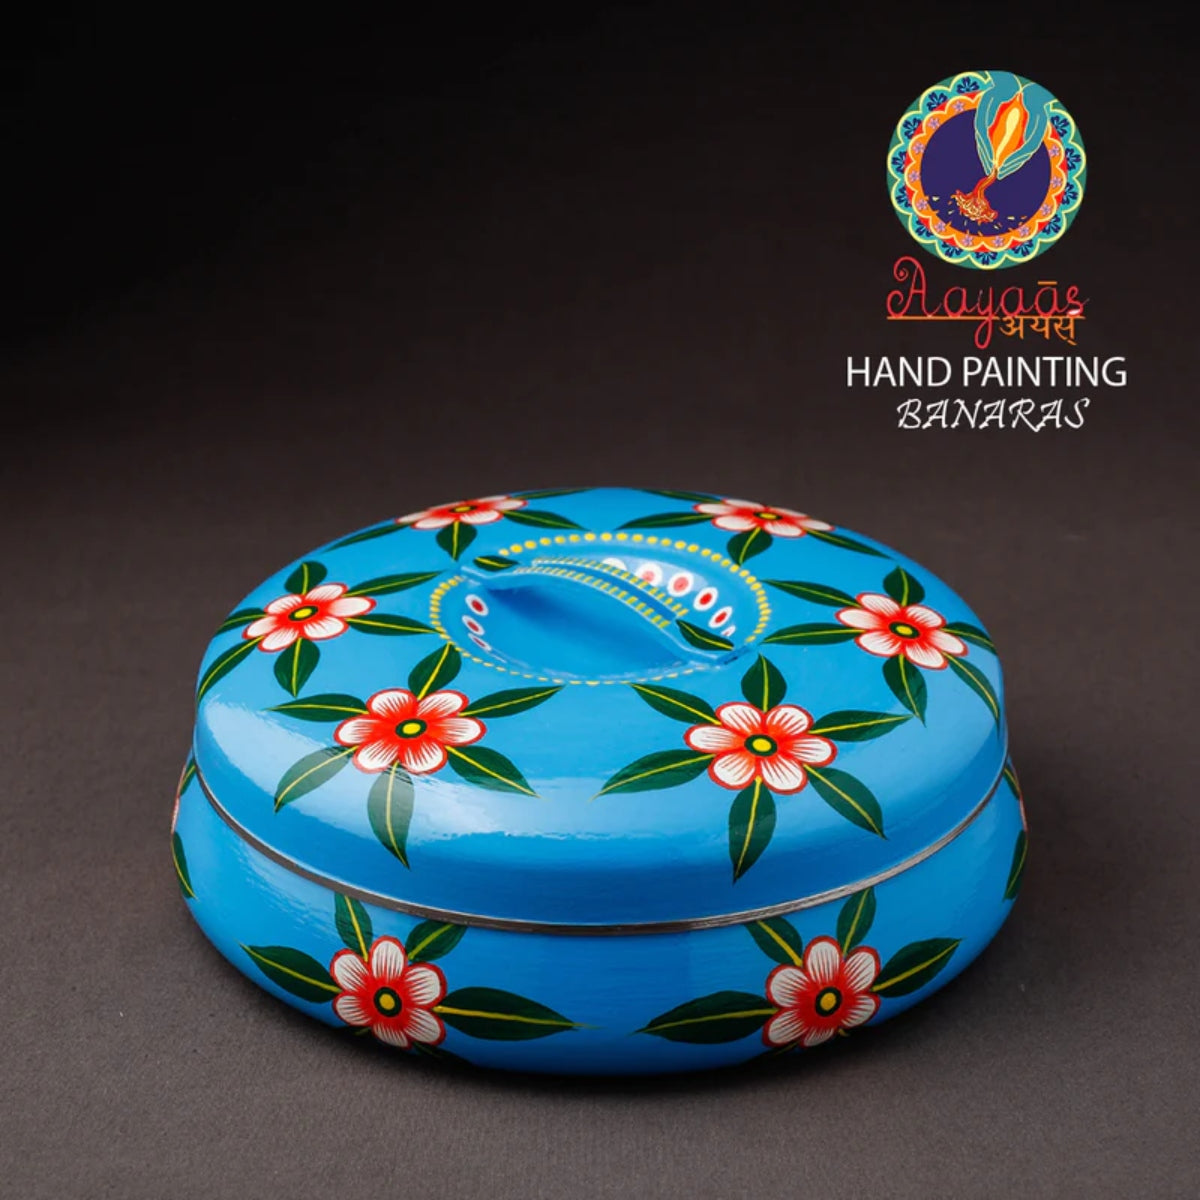 Handpainted Spice Boxes/ Masala Boxes